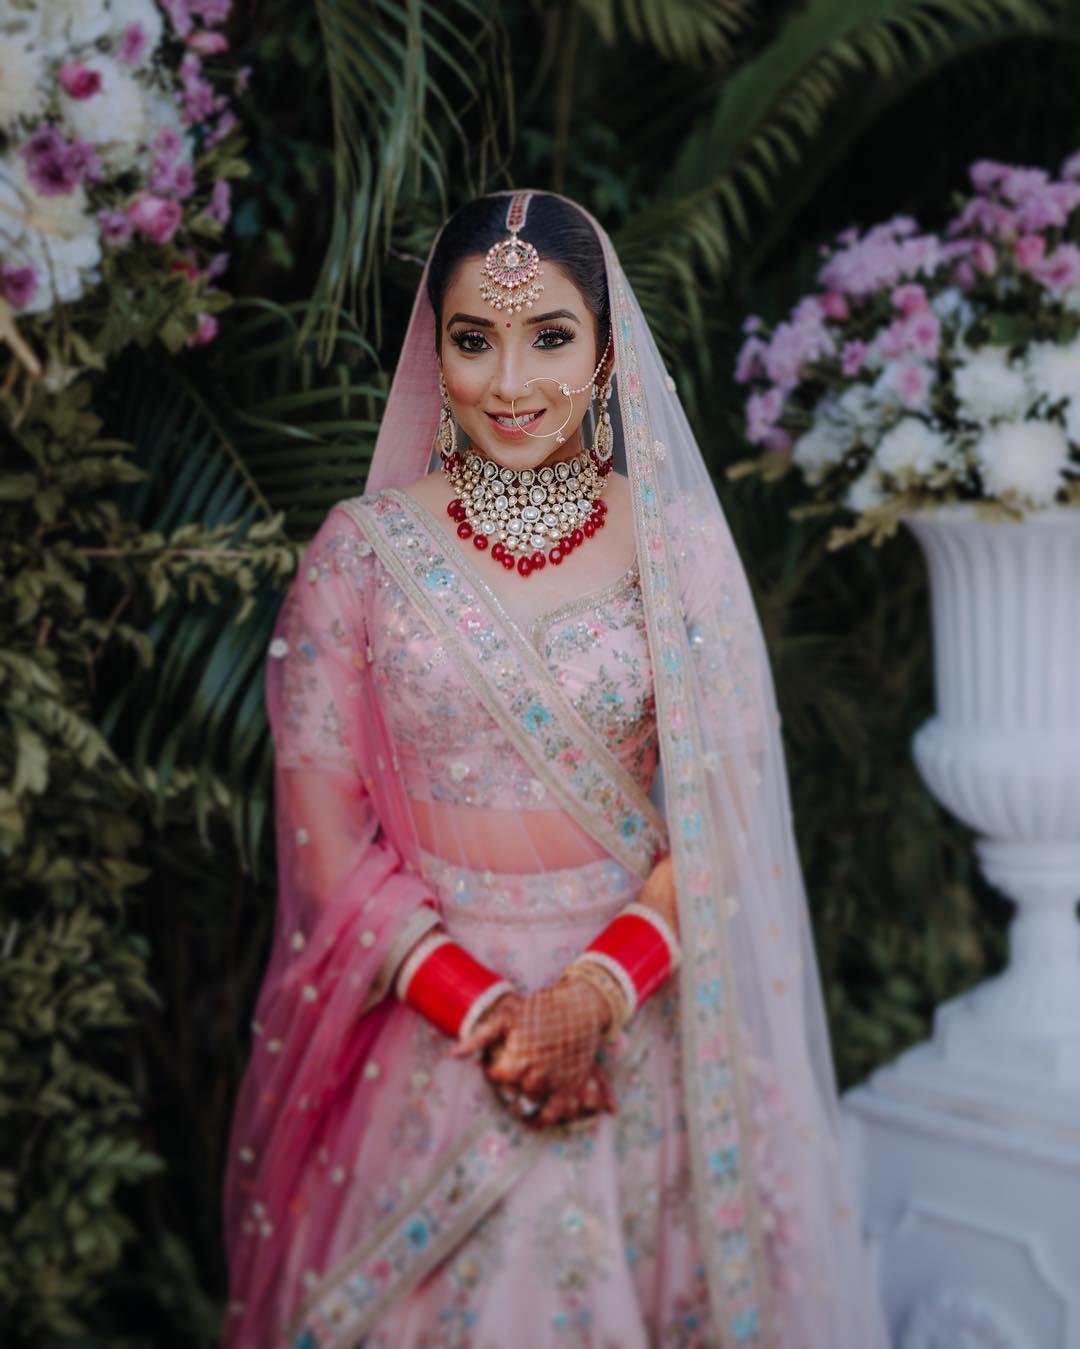 The Sabyasachi Bride Donned A Pink Lehenga With Intricate Gold Embroidery  And Exquisite Jewellery